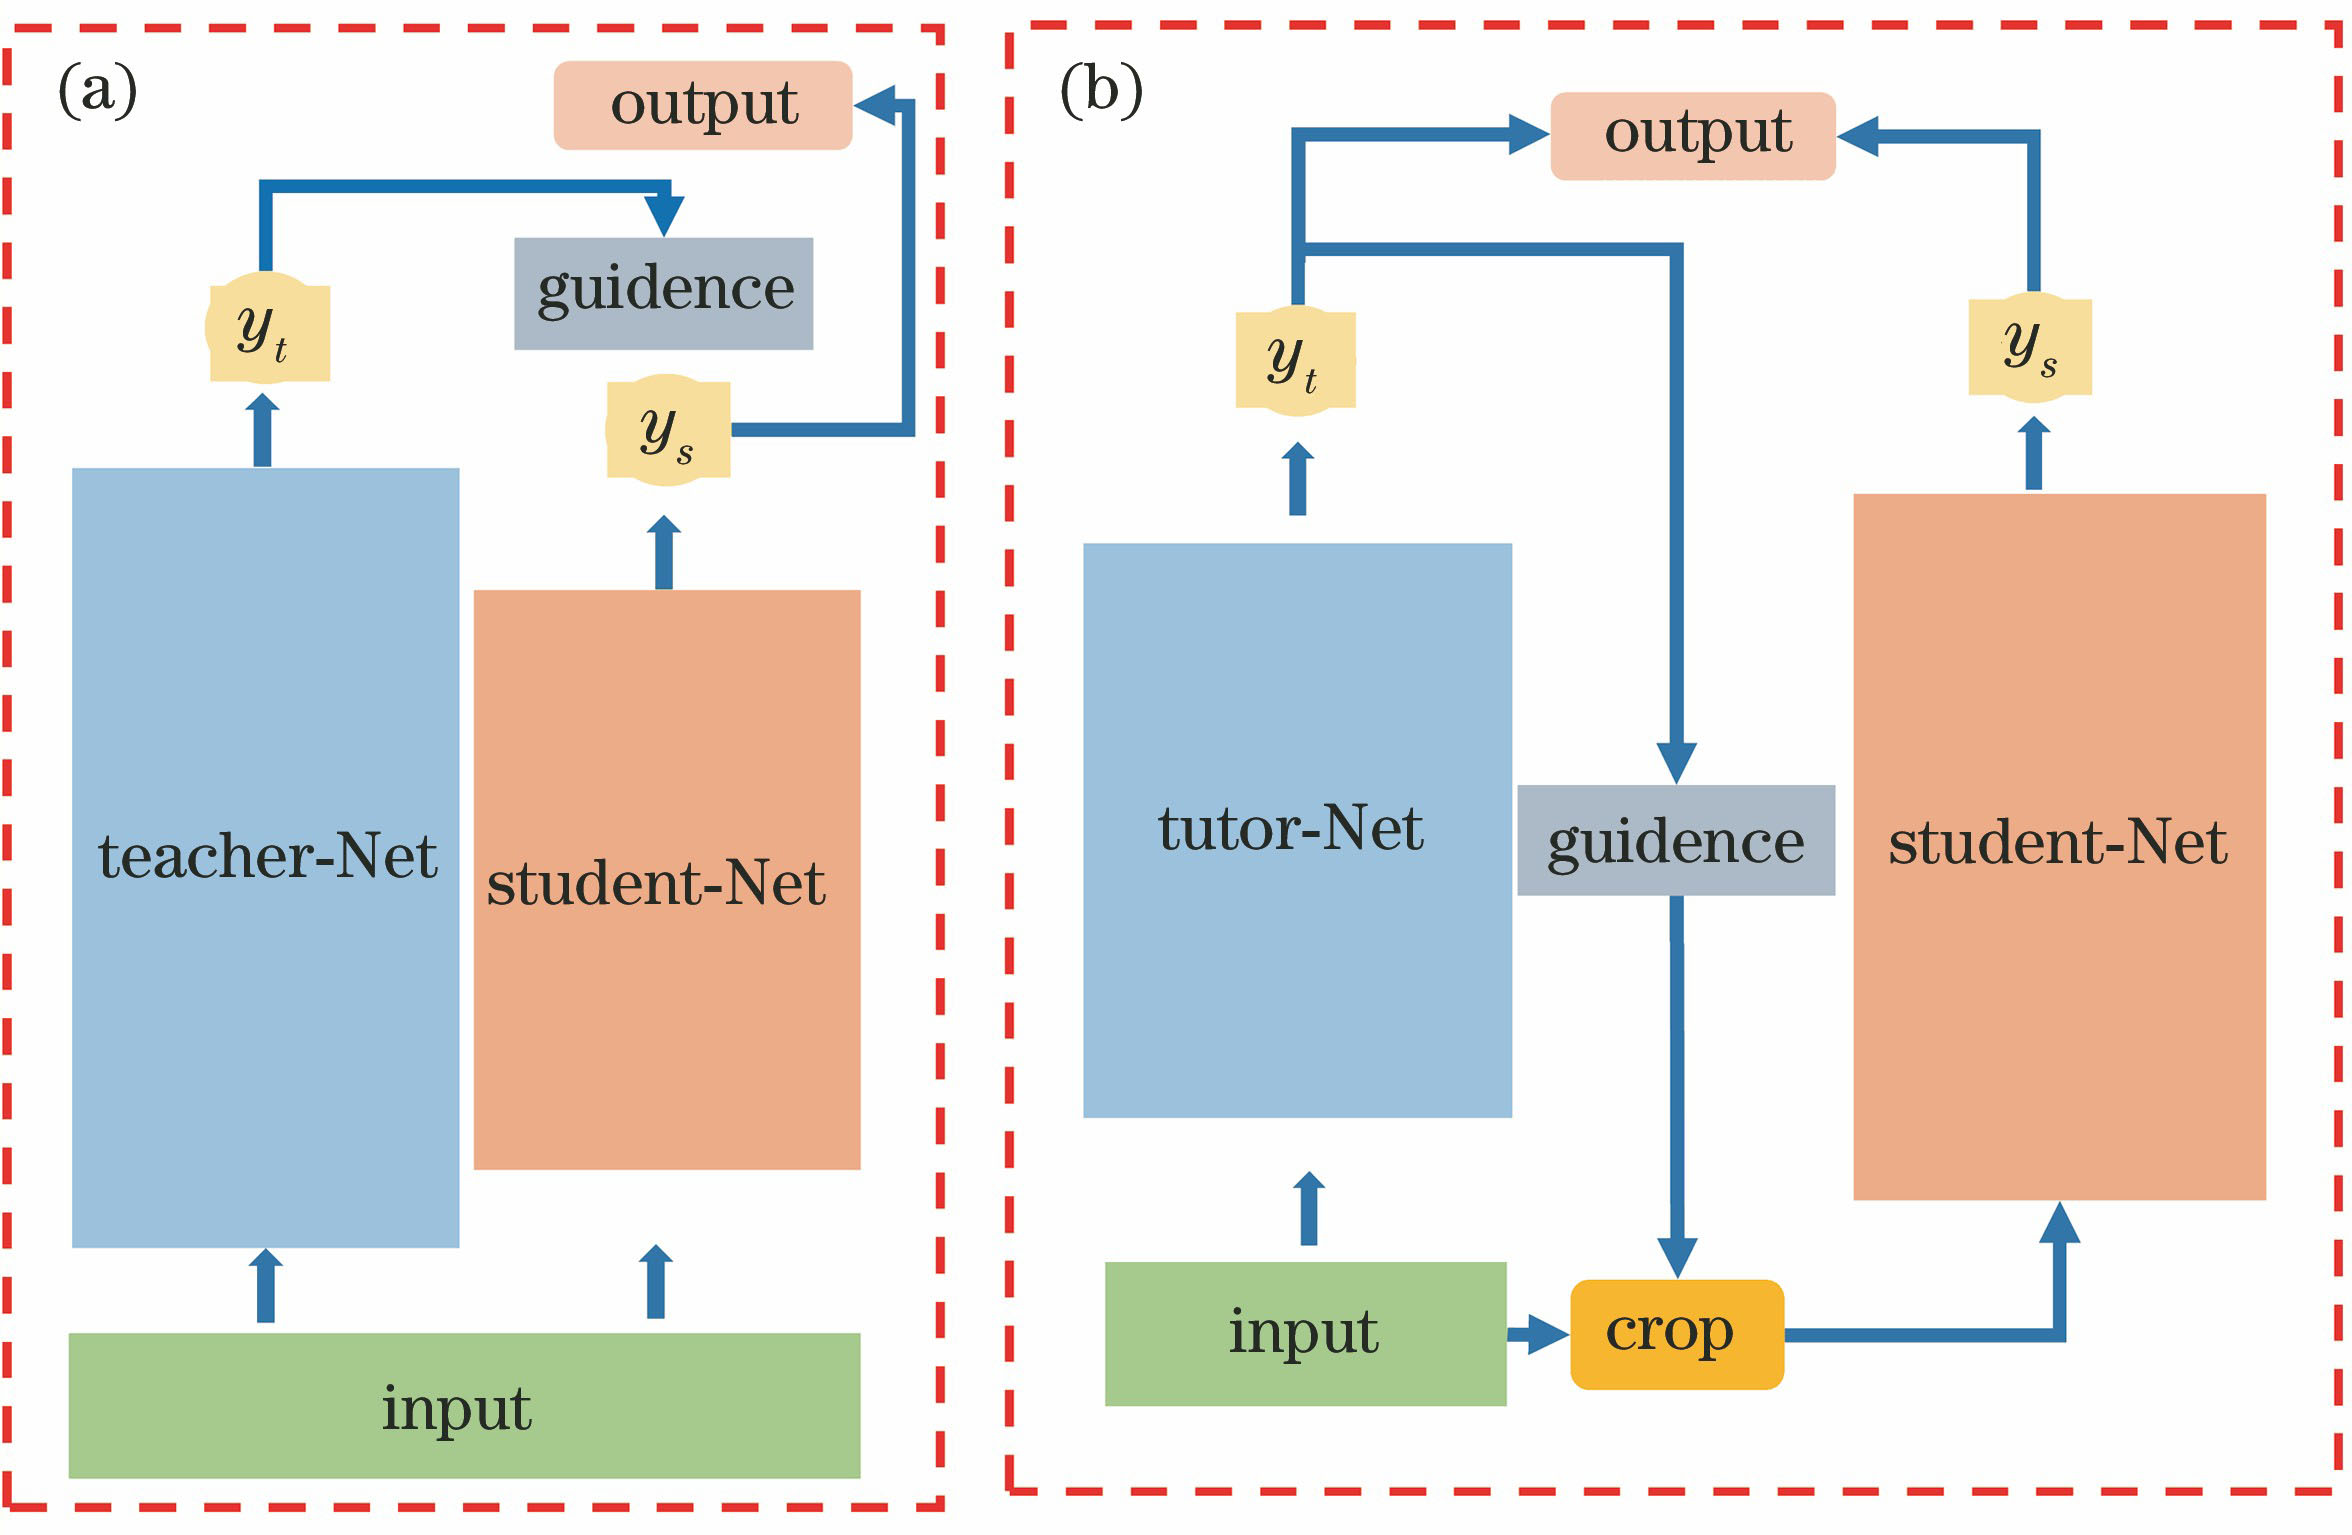 Traditional teacher-student network and proposed method. (a) Traditional teacher-student network; (b) proposed method